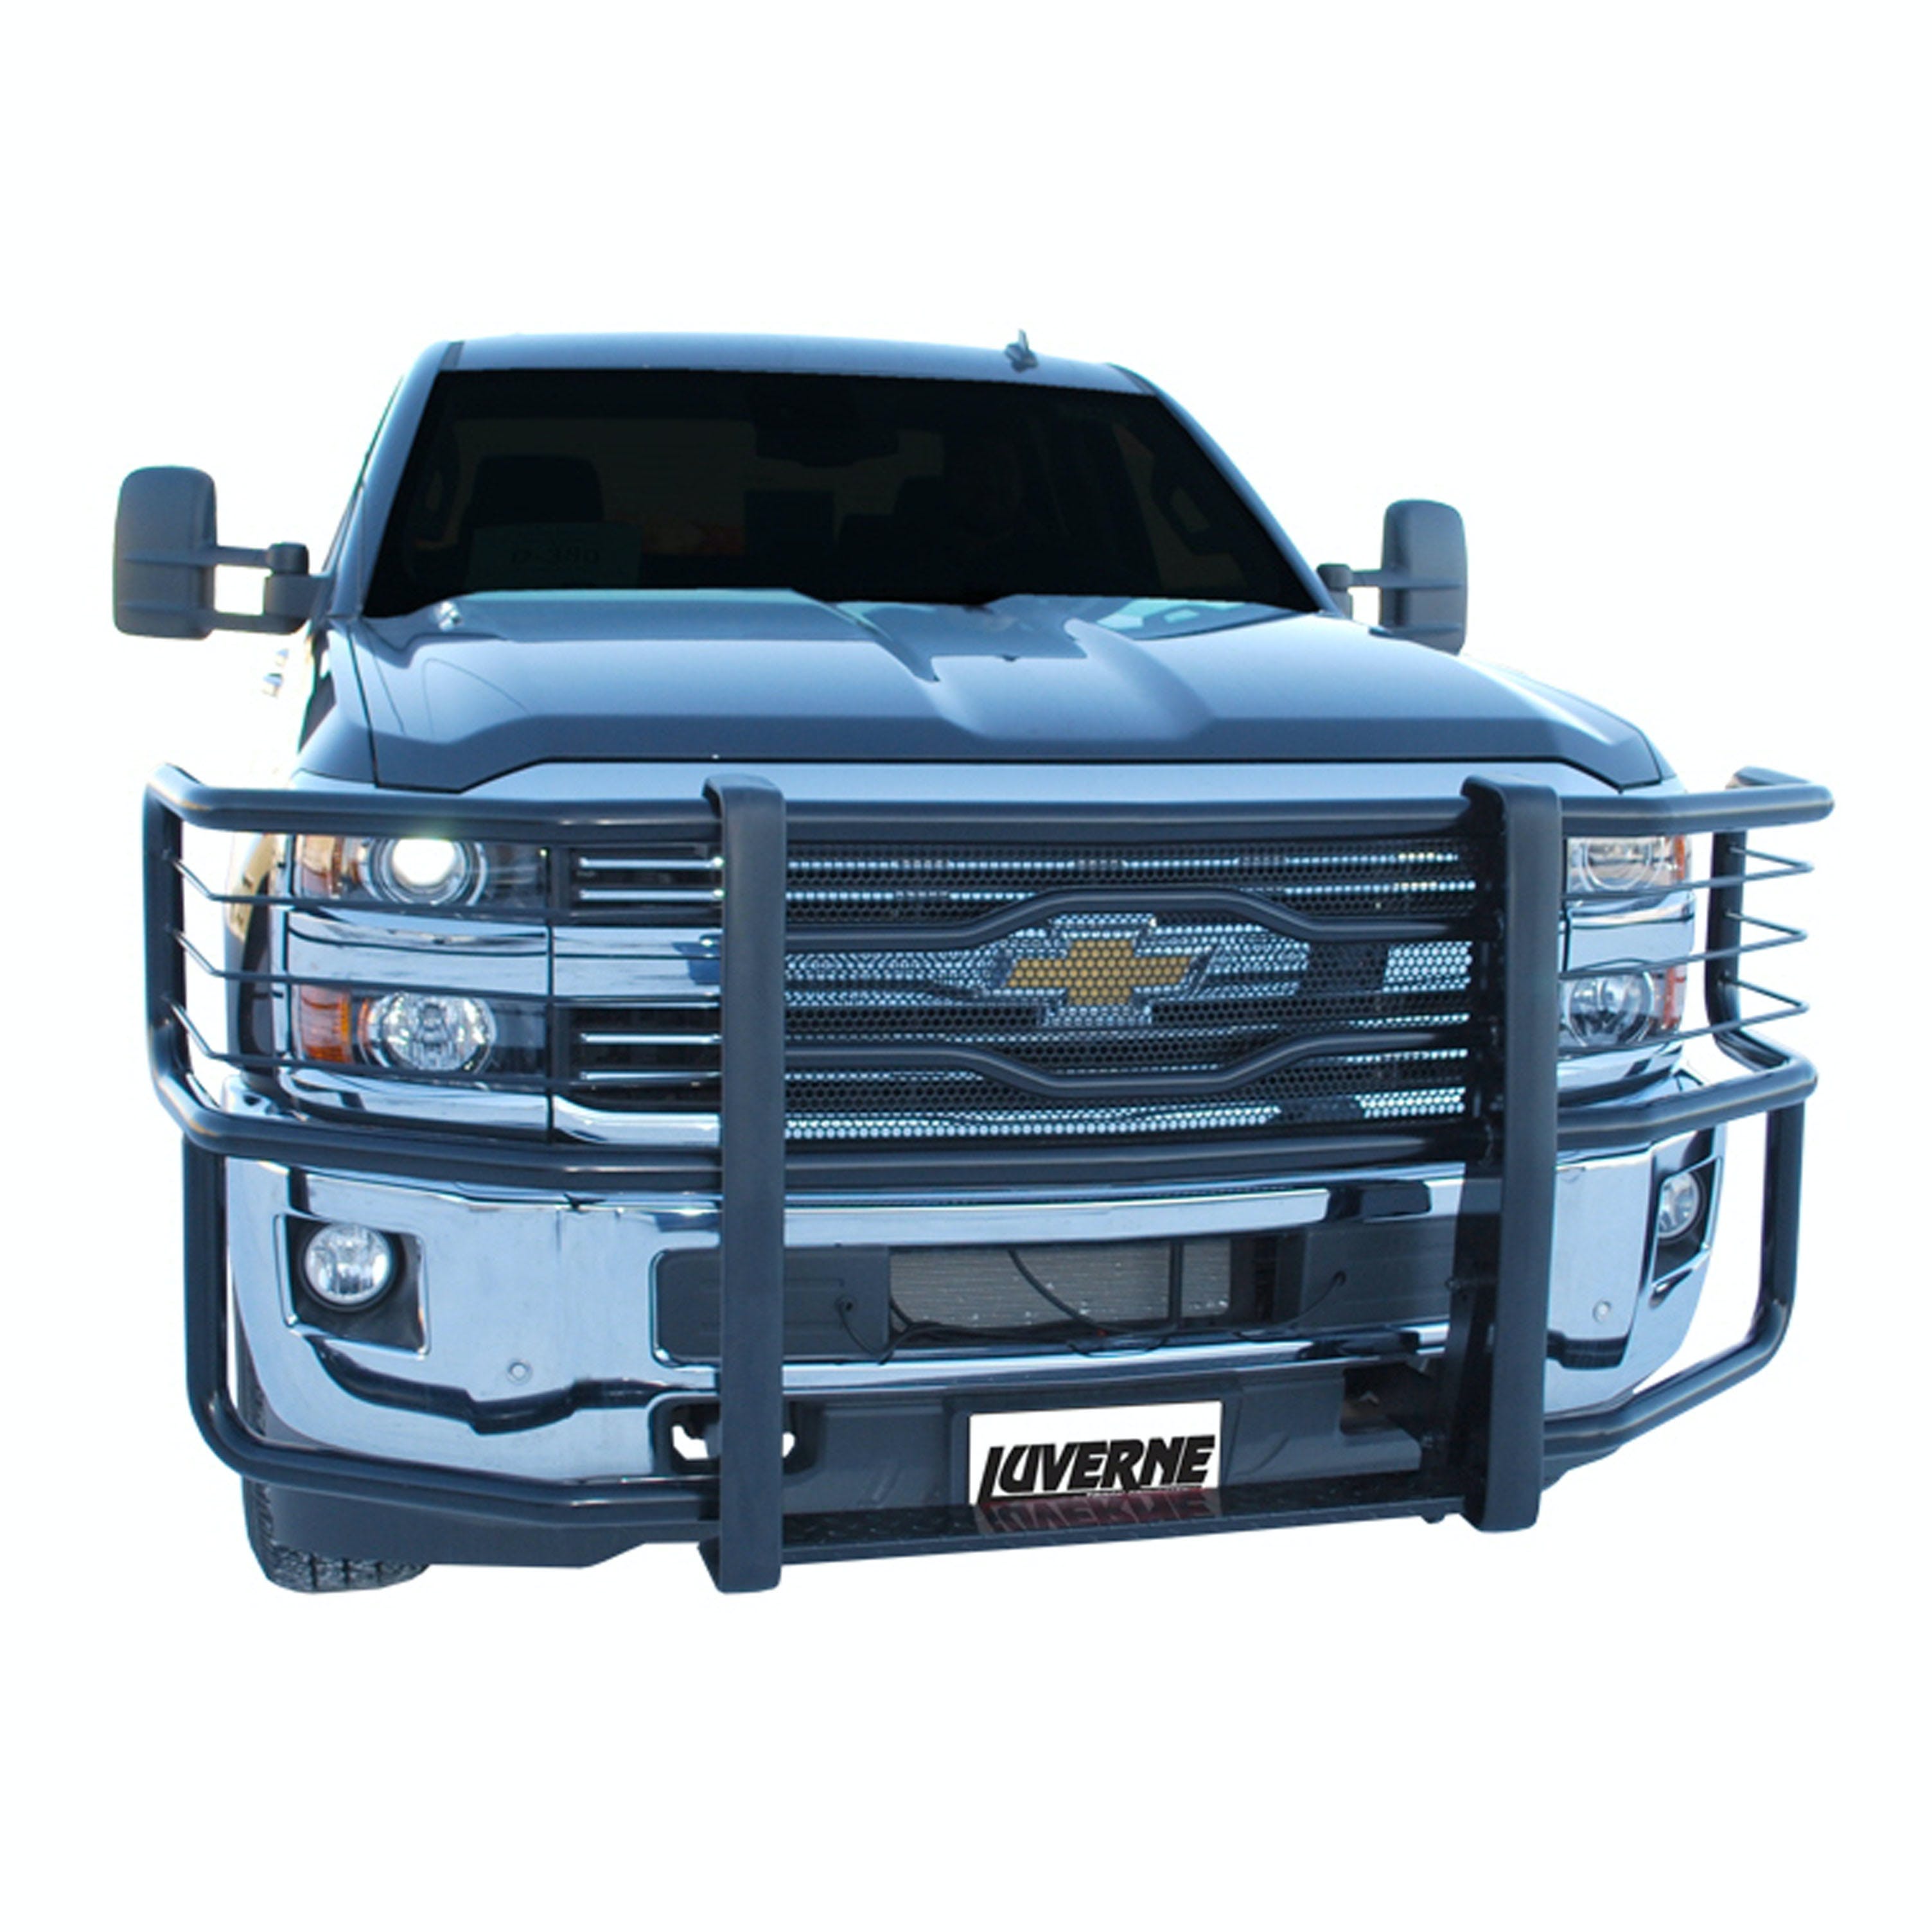 LUVERNE 321610 Prowler Max Grille Guard Brackets